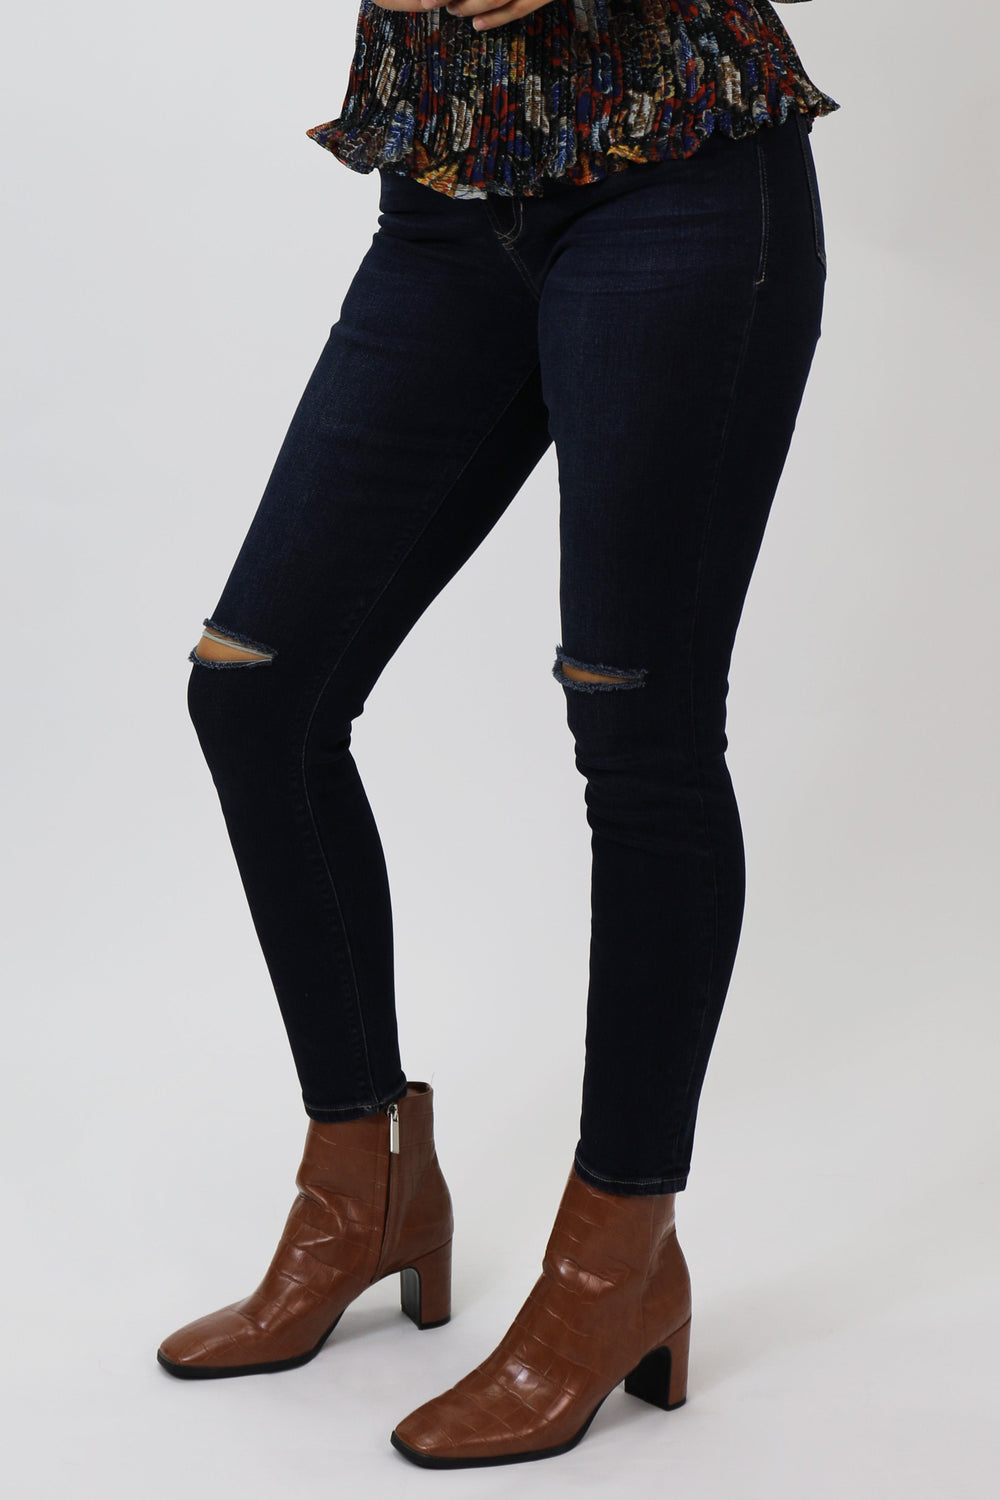 image of a female model wearing a GISELE HIGH RISE SKINNY JEANS FRESNO JEANS